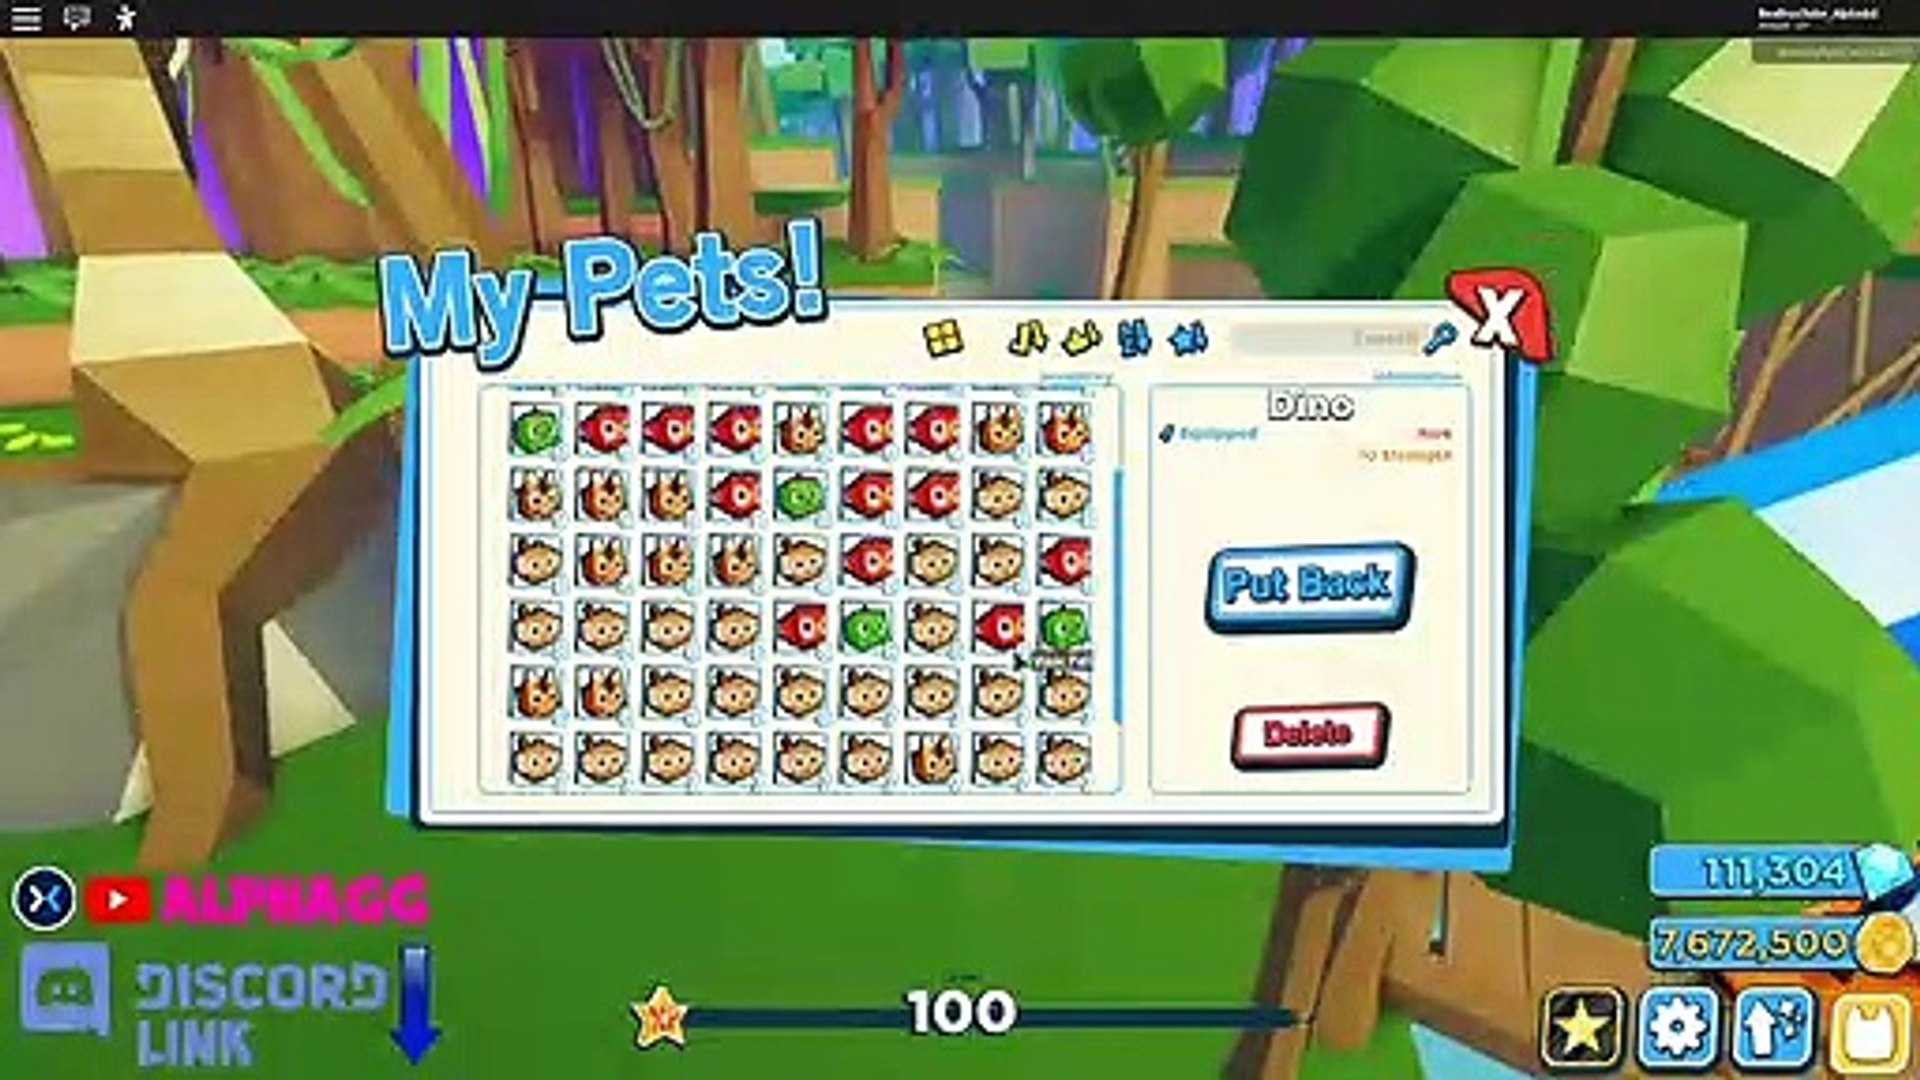 Spending 10 000 000 Coins To Get The Legendary Secret Pet In Pet Simulator 2 Roblox Video Dailymotion - roblox pet simulator 2 codes 2020